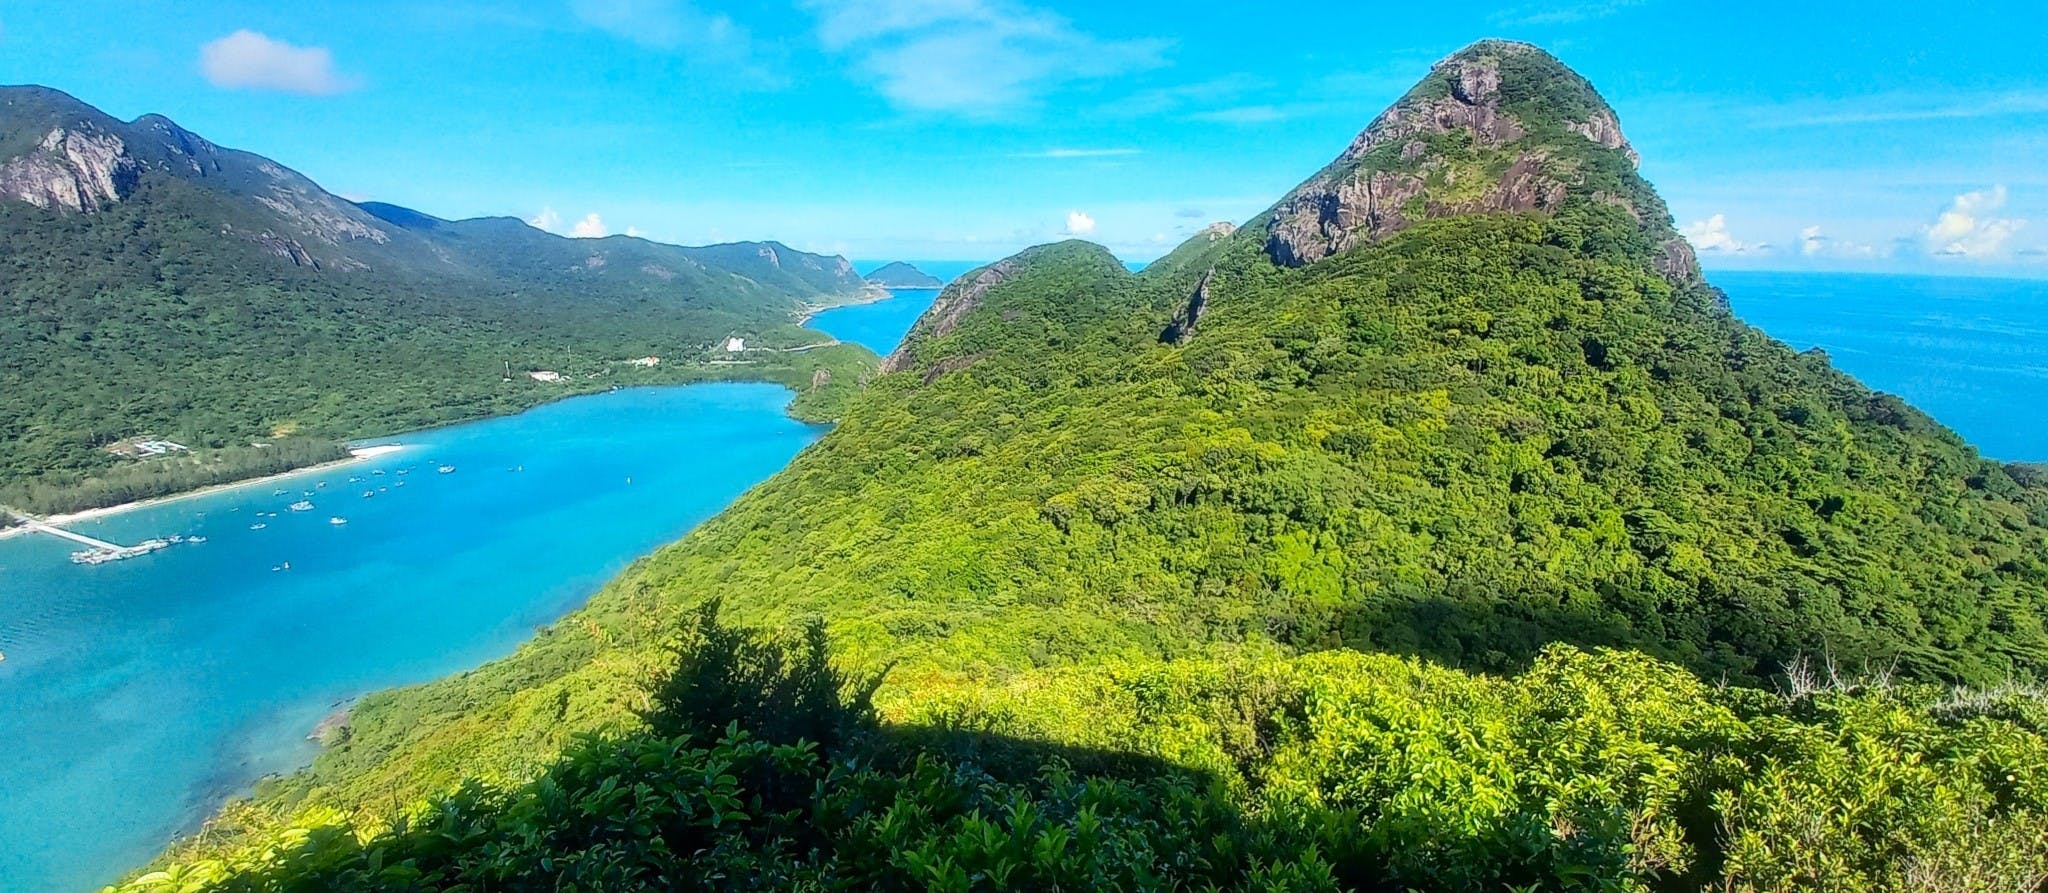 Hiking the Con Dao Islands